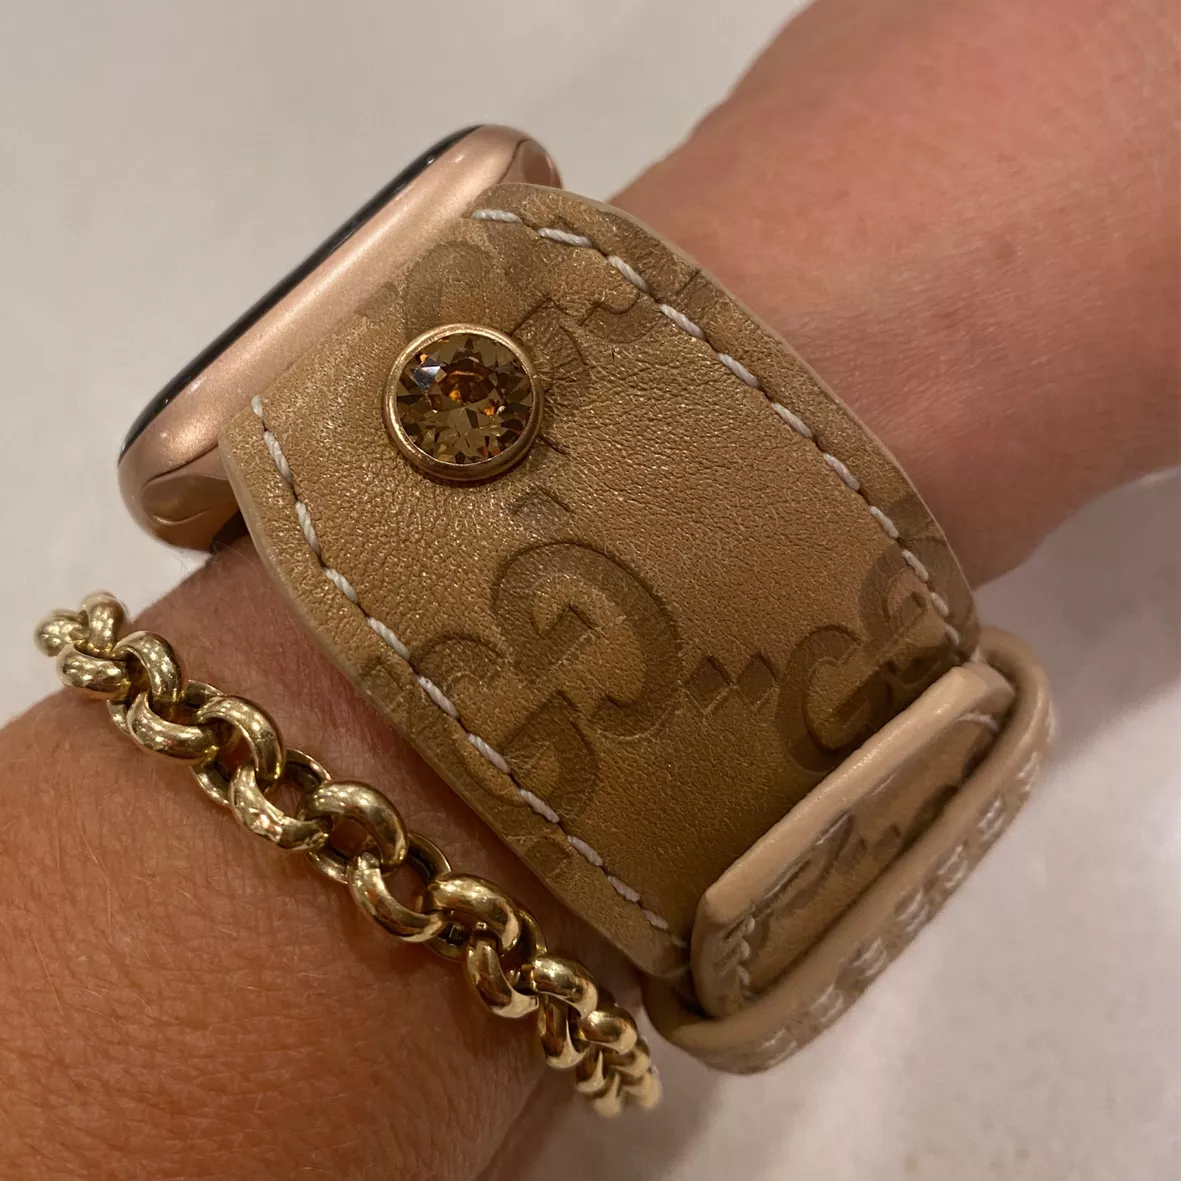 Upcycled Gucci Apple Watch Band | anagheatelier